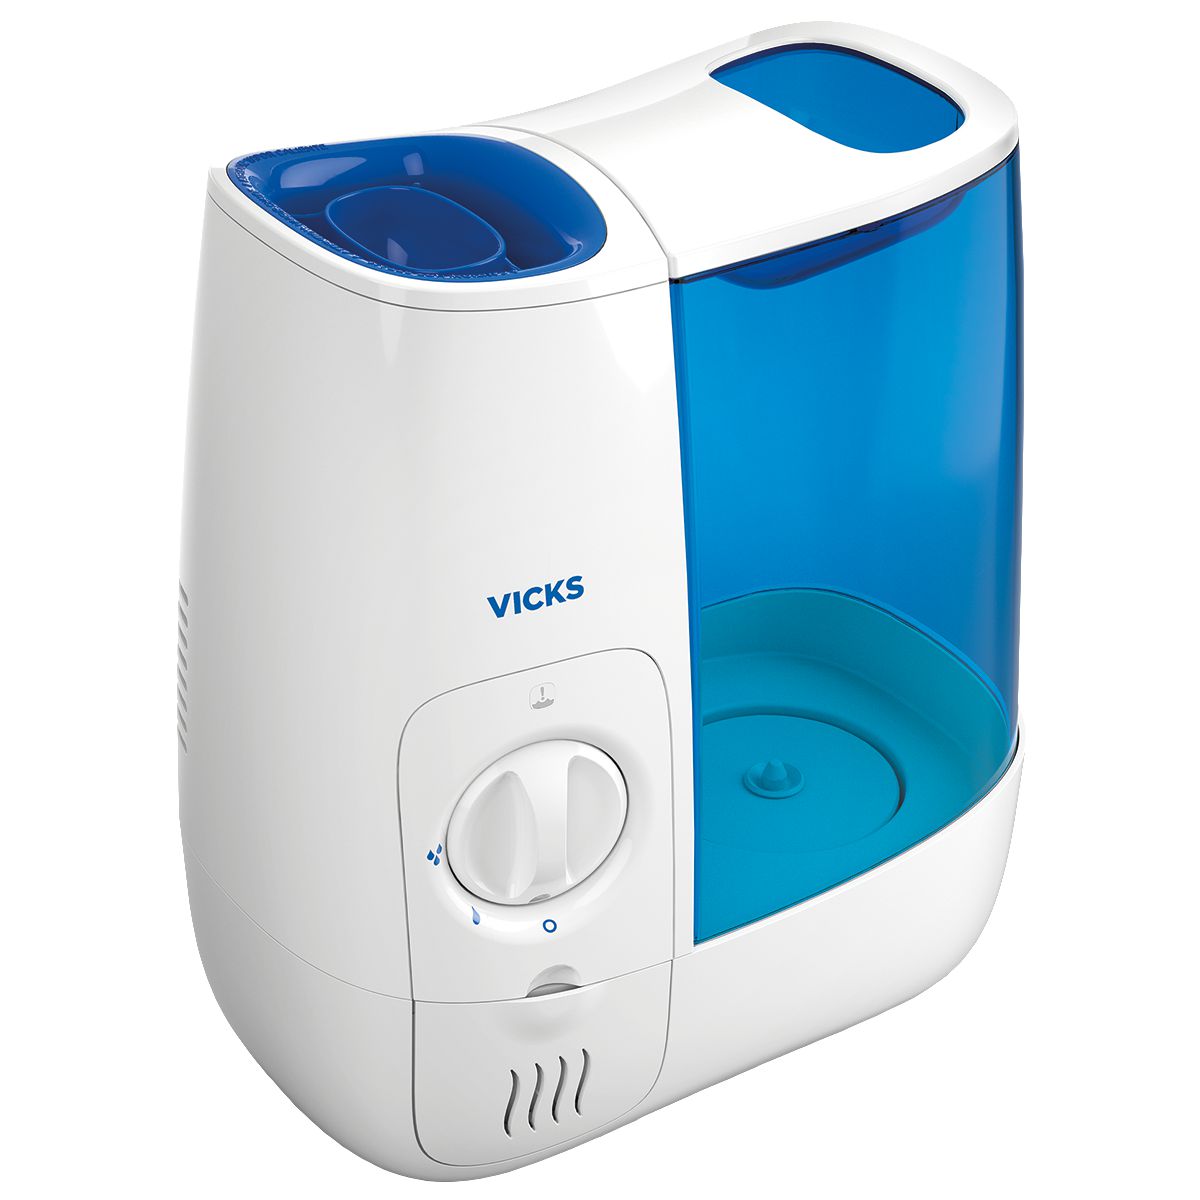 humidifiers on sale this week